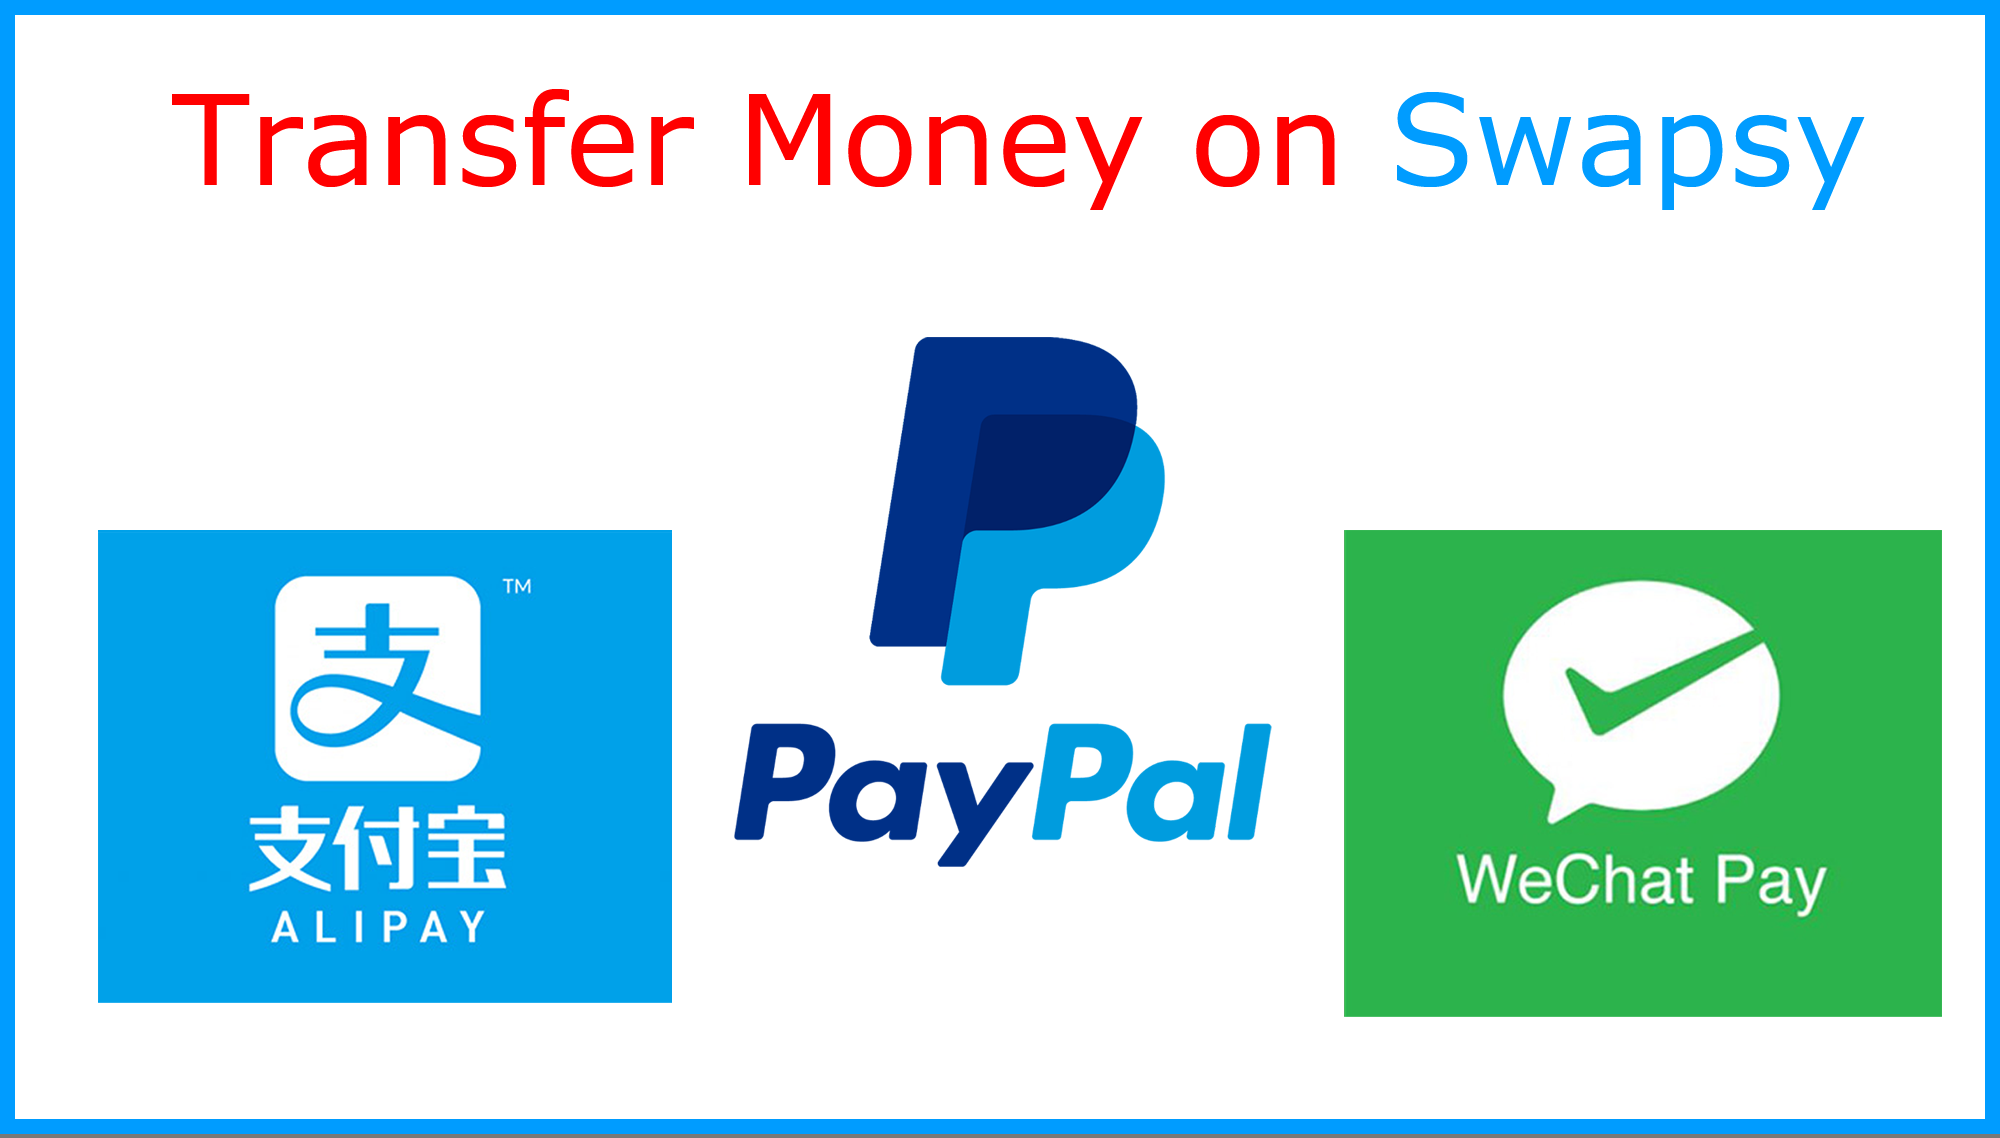 Exchange PayPal USD to AliPay CNY